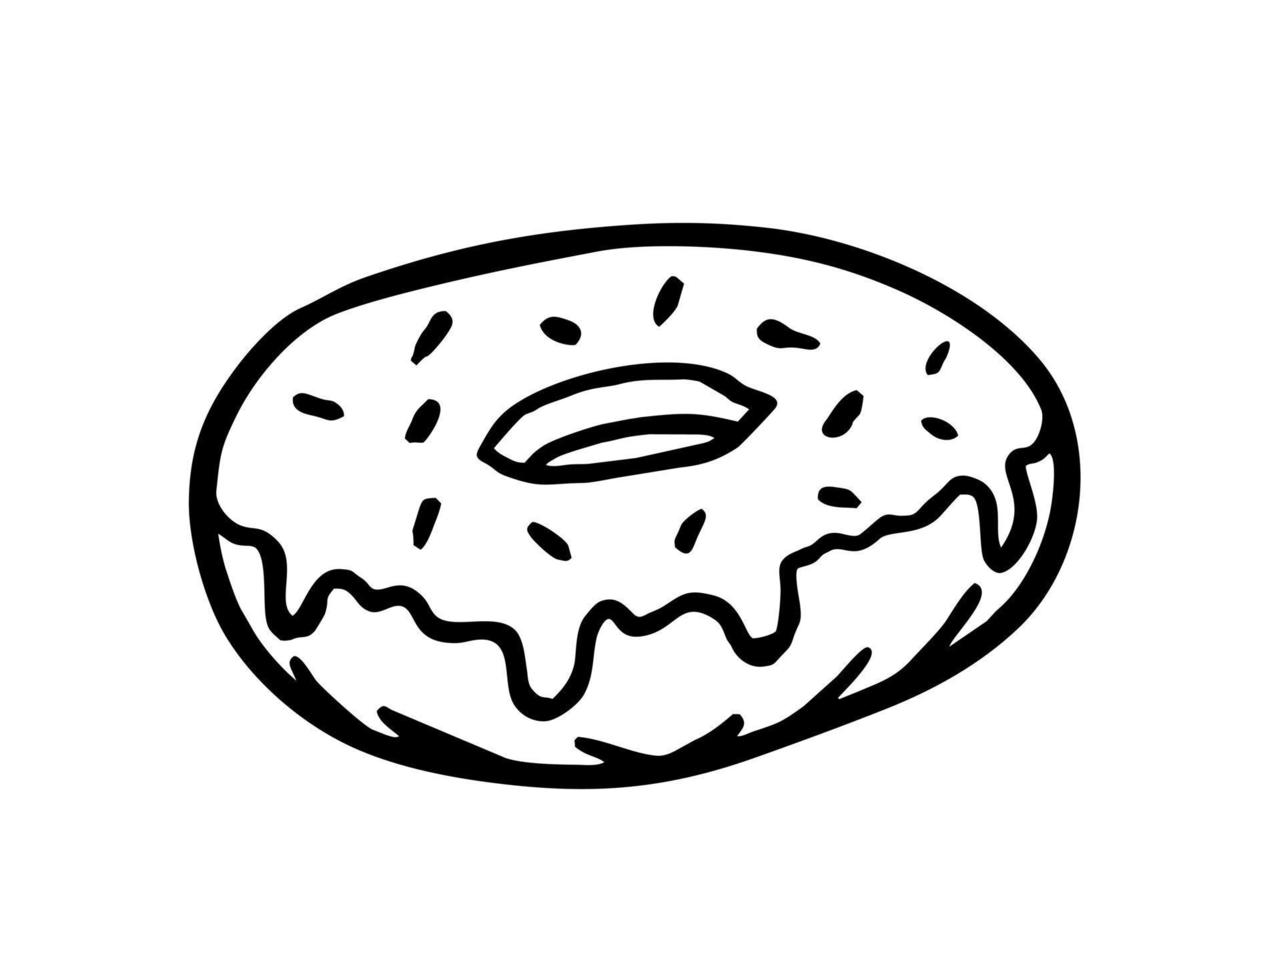 Donut is a hand-drawn bakery element Vector in the style of a doodle sketch. For cafe and bakery menus